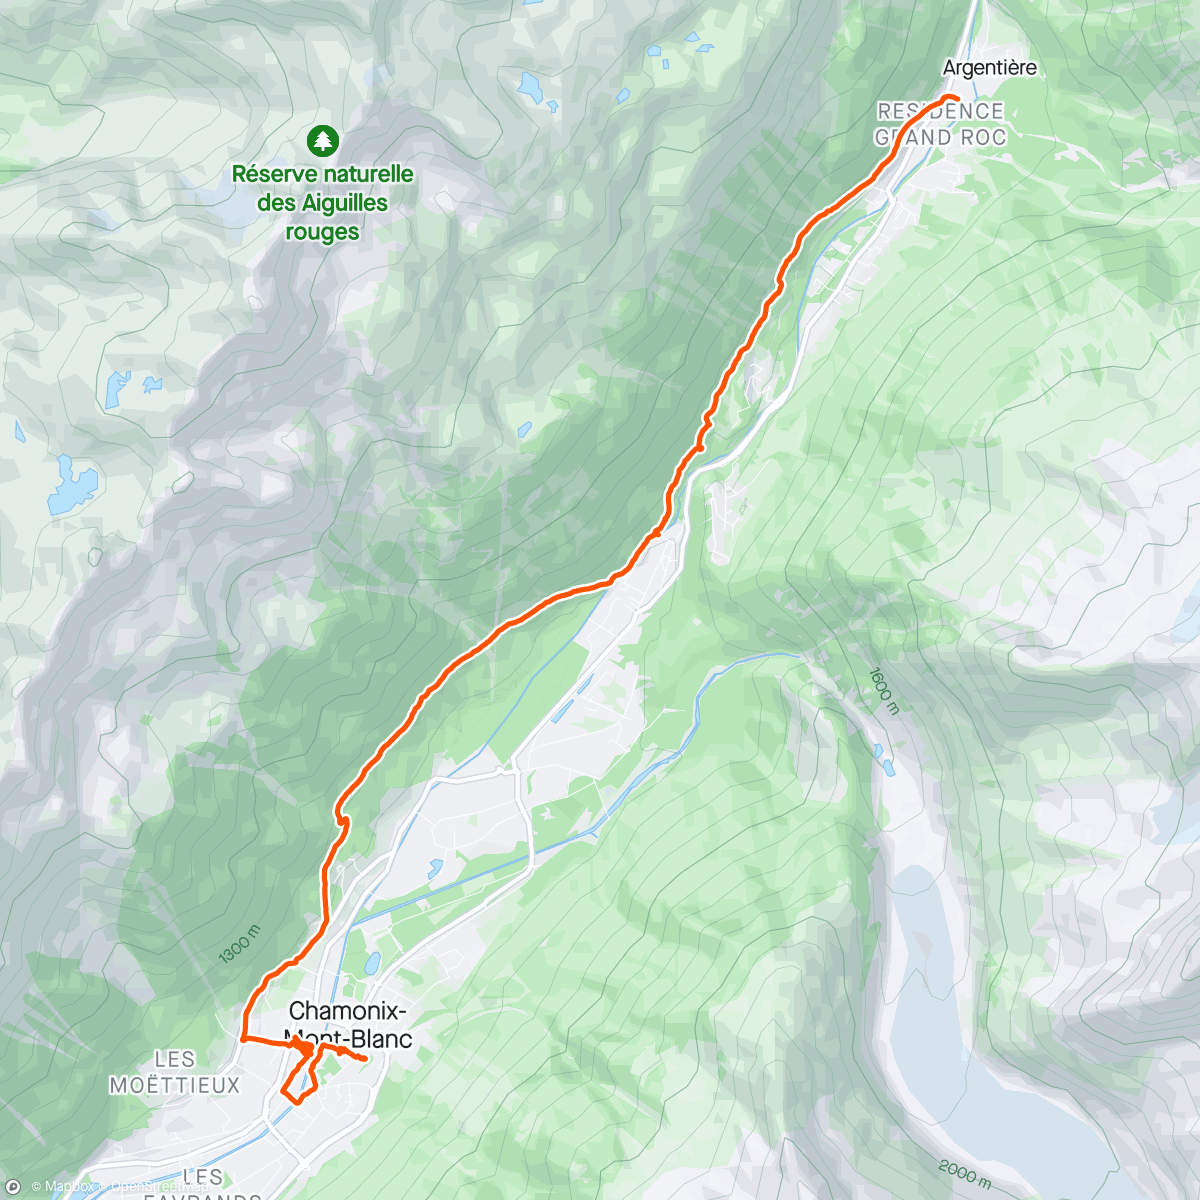 Mapa da atividade, Chamonix time! Kept it low and dry, hiking from Argentiere to Chamonix, train back to Buet on the Mont Blanc Express🚂🏔️